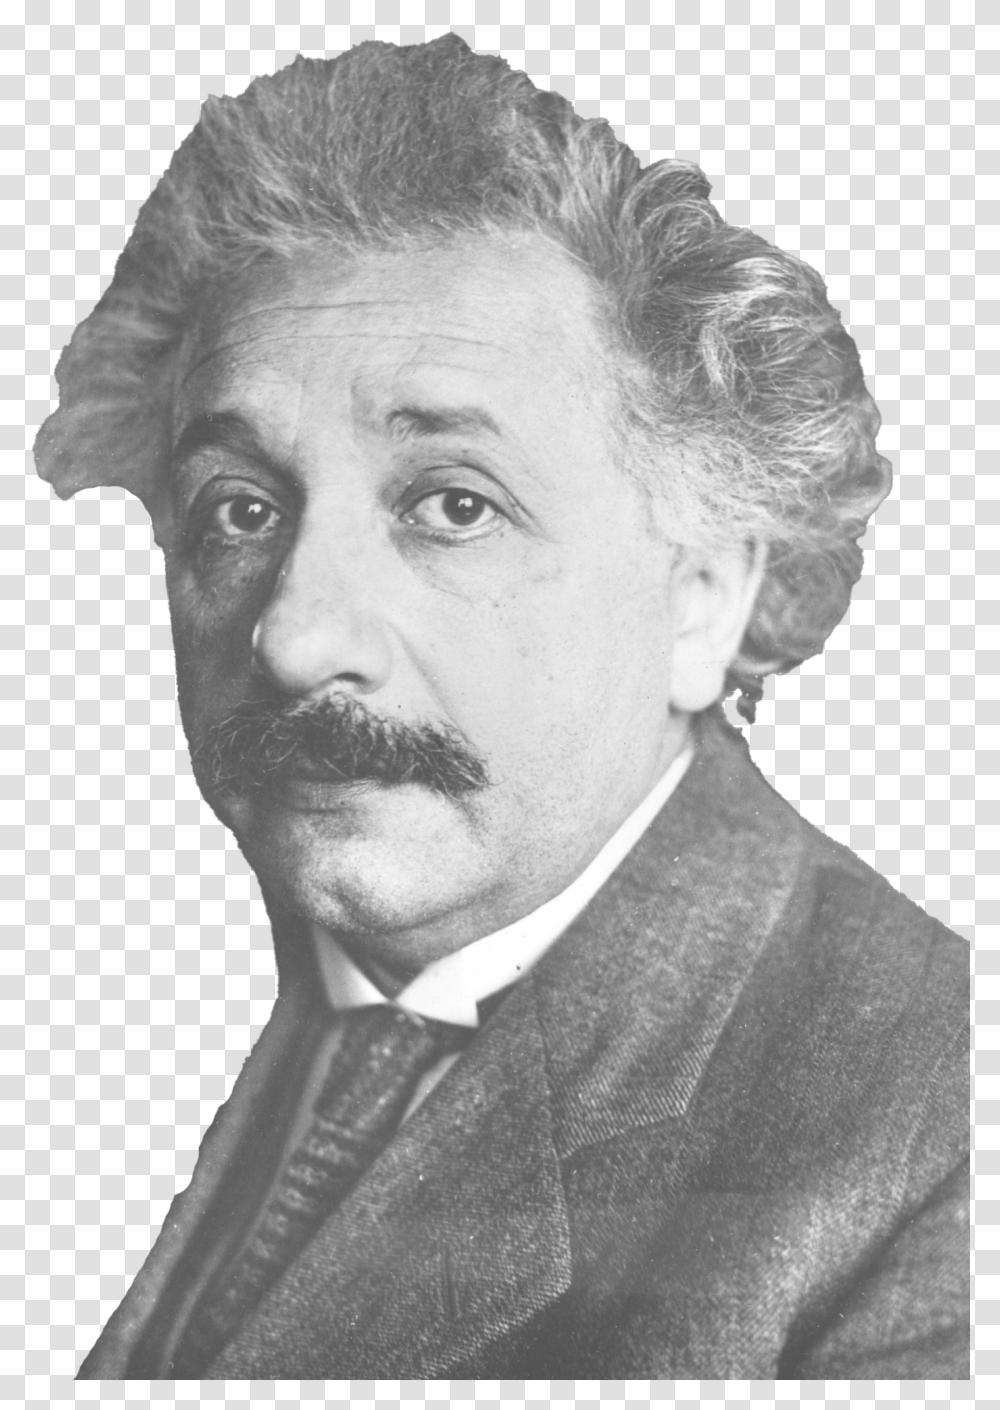 Scientist Albert Einstein Image File All Famous People That Have Died, Face, Person, Head, Portrait Transparent Png